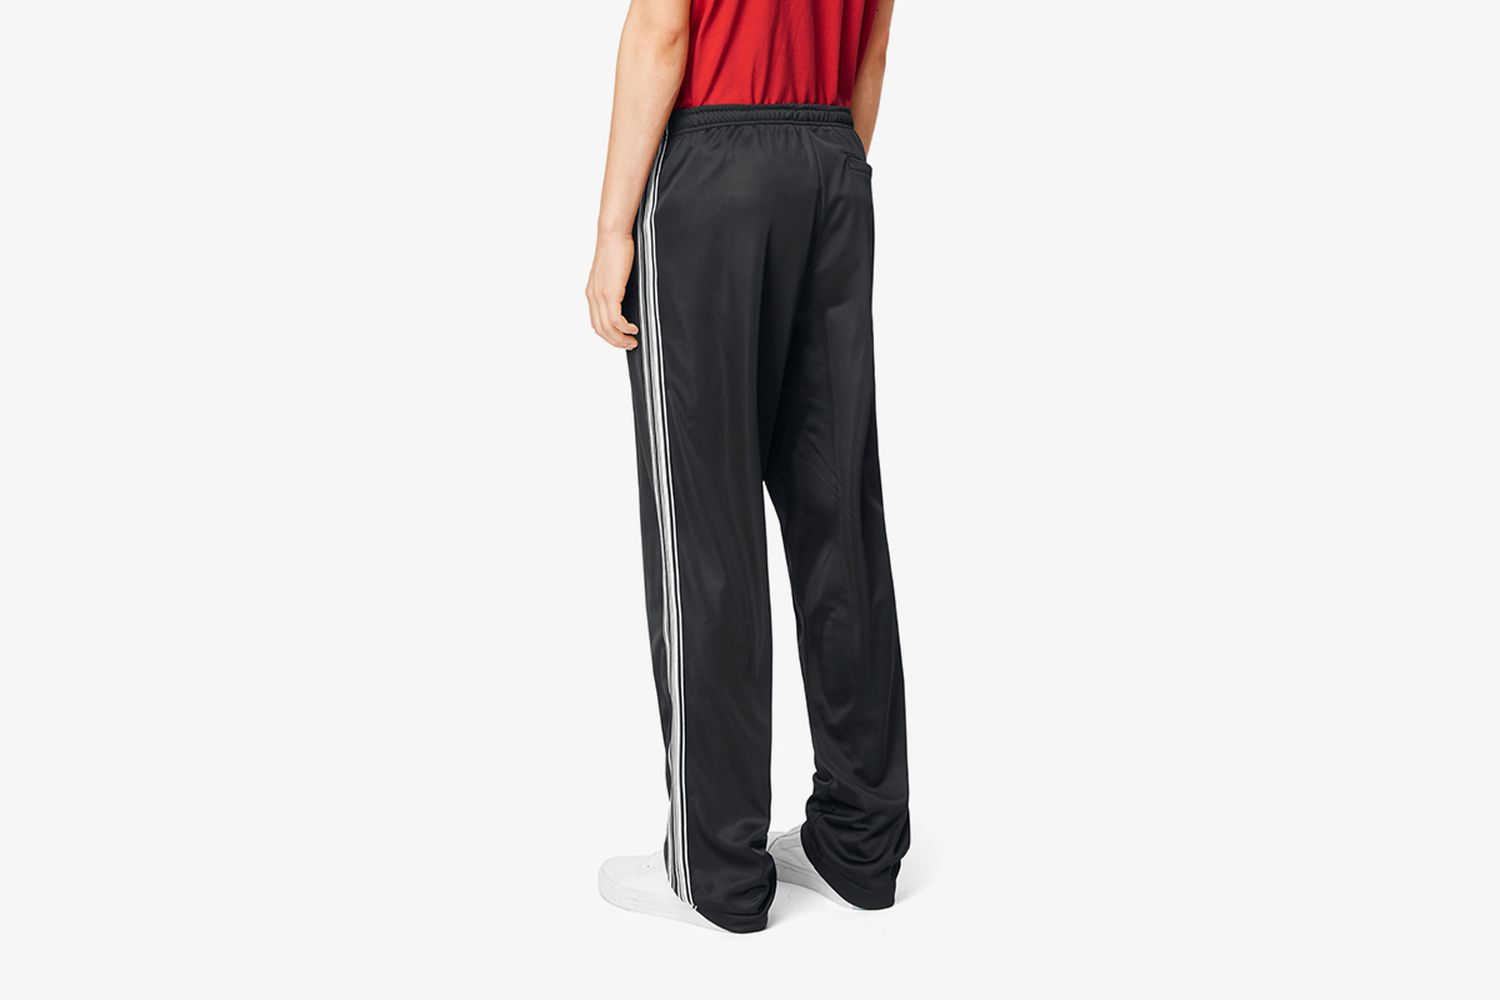 Irvin Trousers